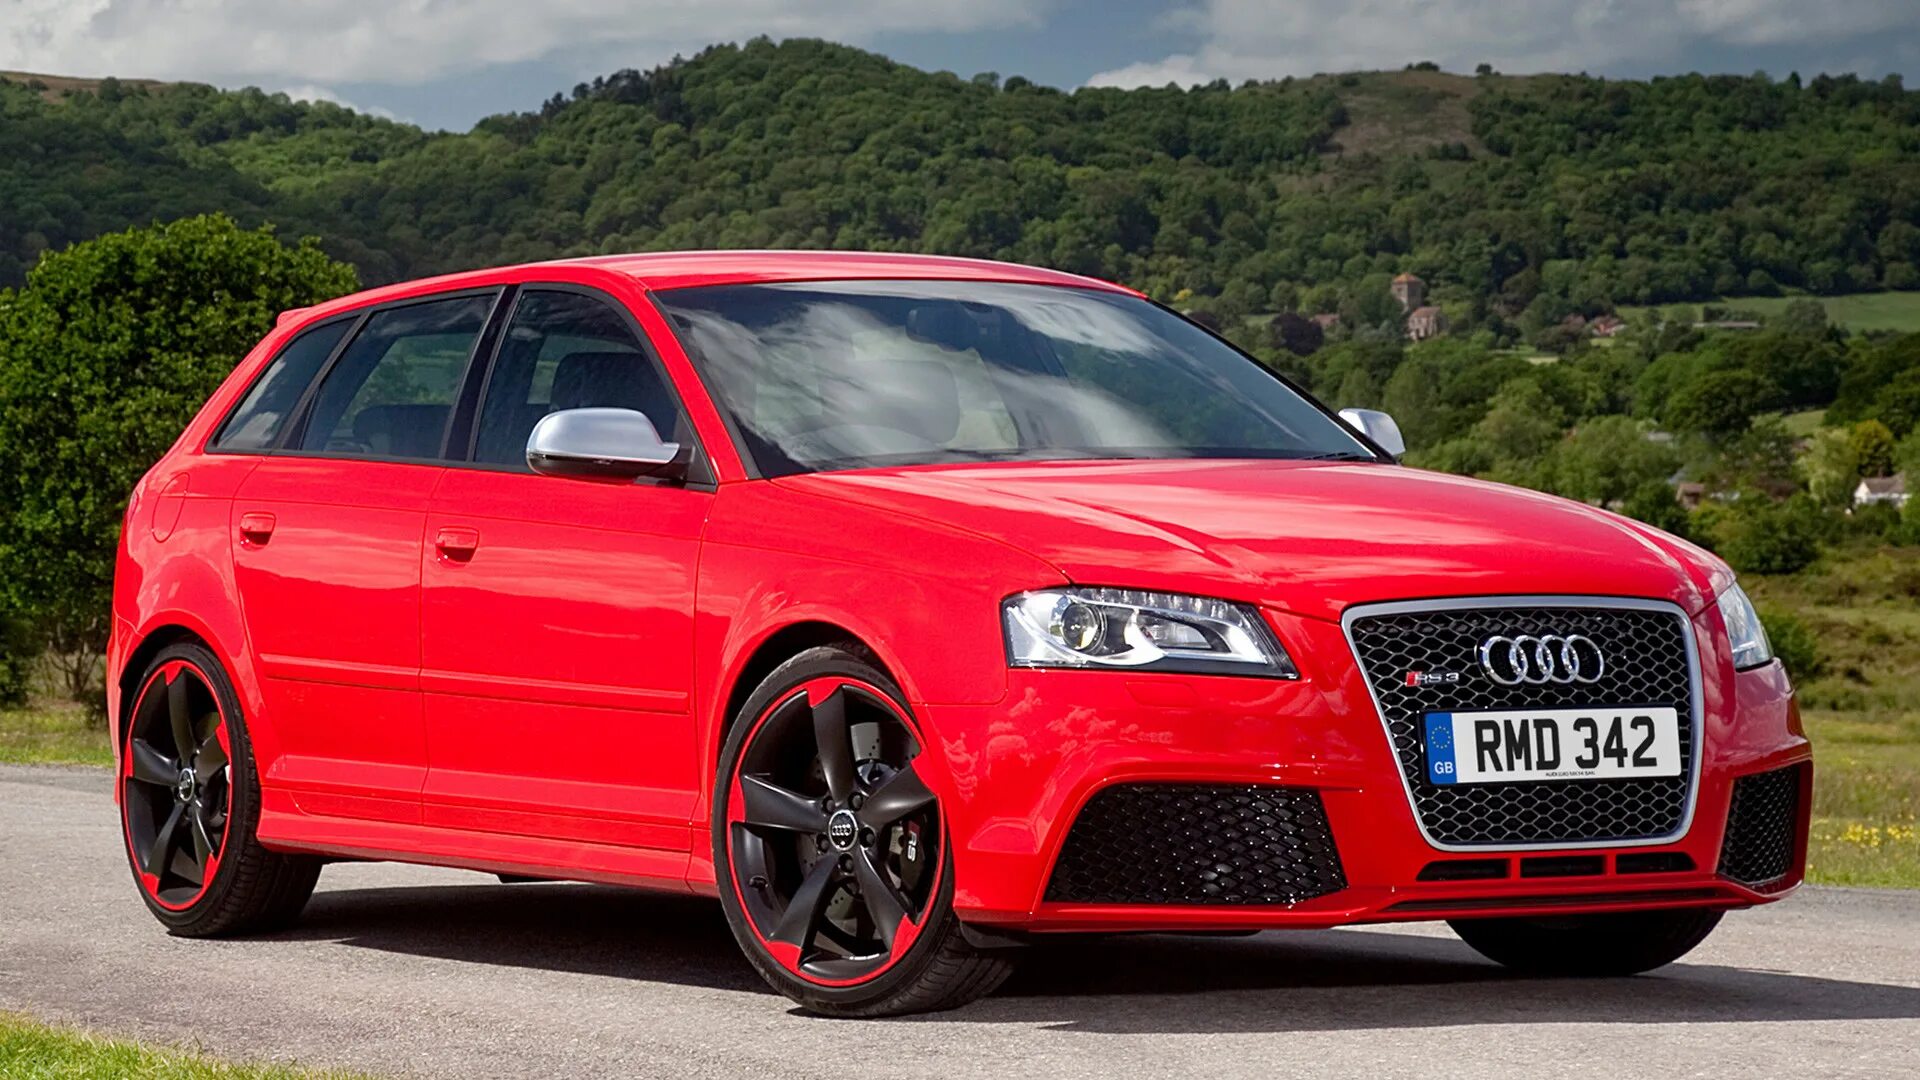 Audi rs3. Audi rs3 Sportback. Audi rs3 Sportback (8pa). Audi rs3 2011.